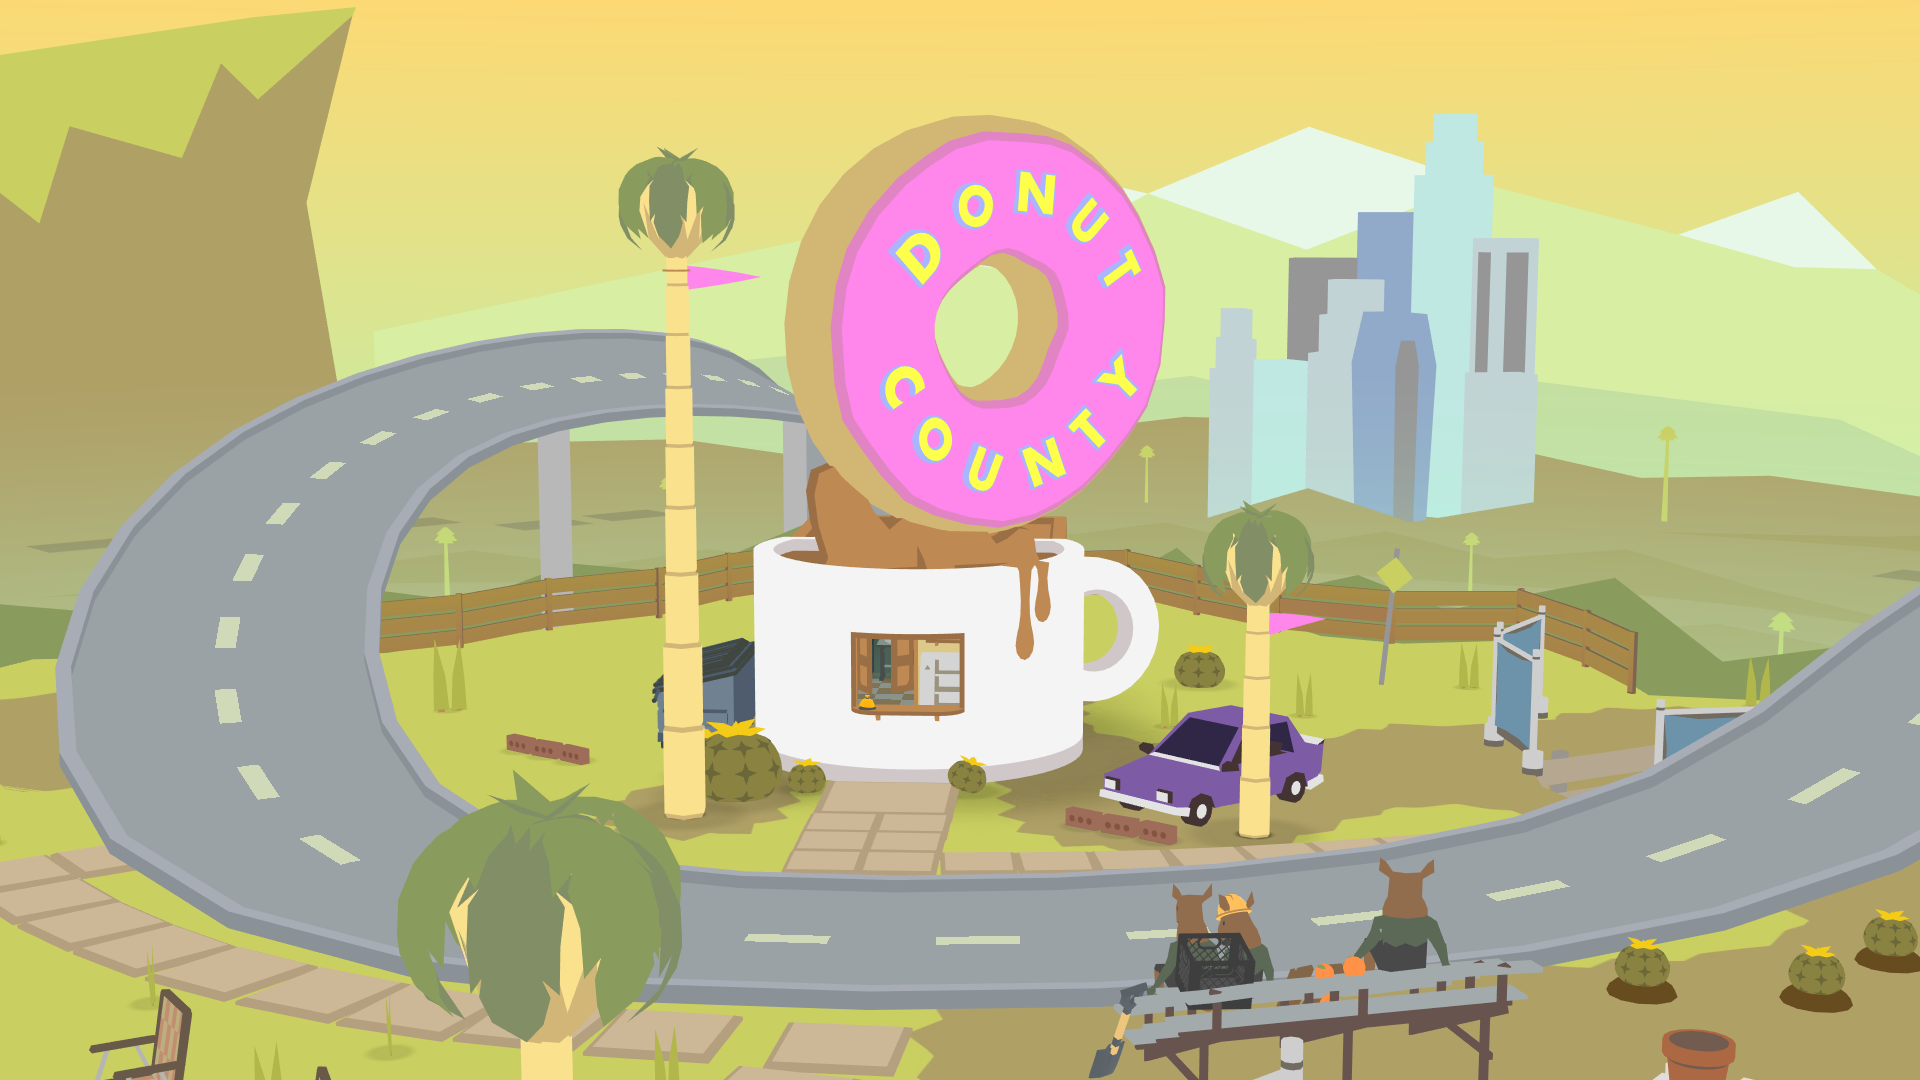 Zany Physics Puzzler Donut County Releases On August 28th